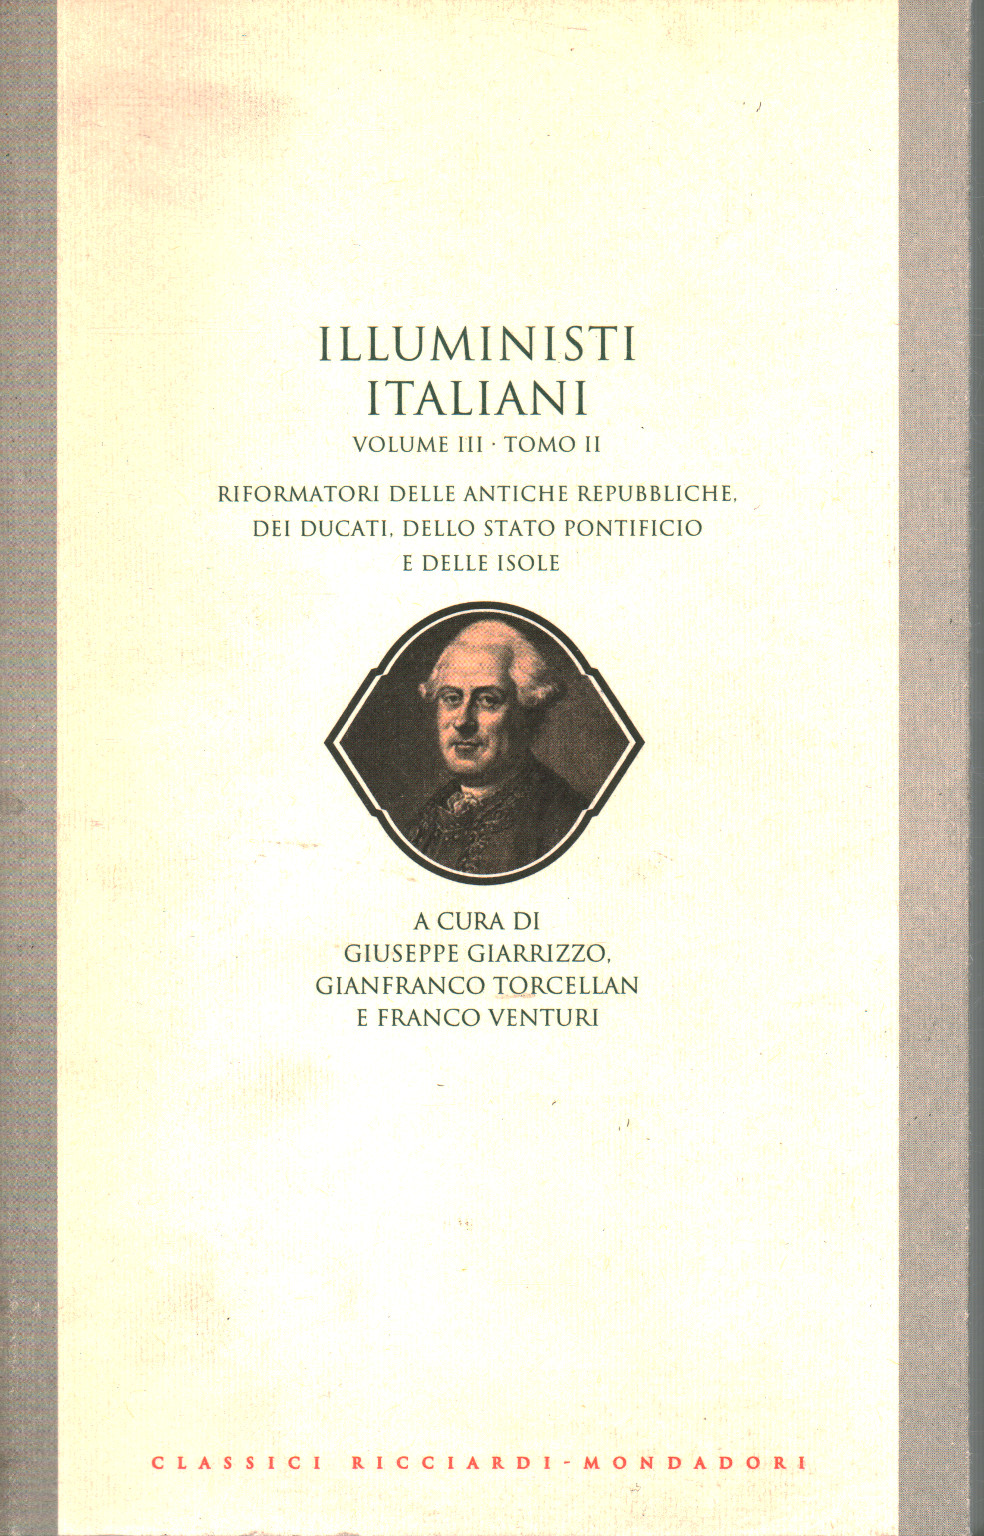 The enlightenment in italy. The reformers of the ancient king, G. Giarrizzo G. Torcellan F. Venturi